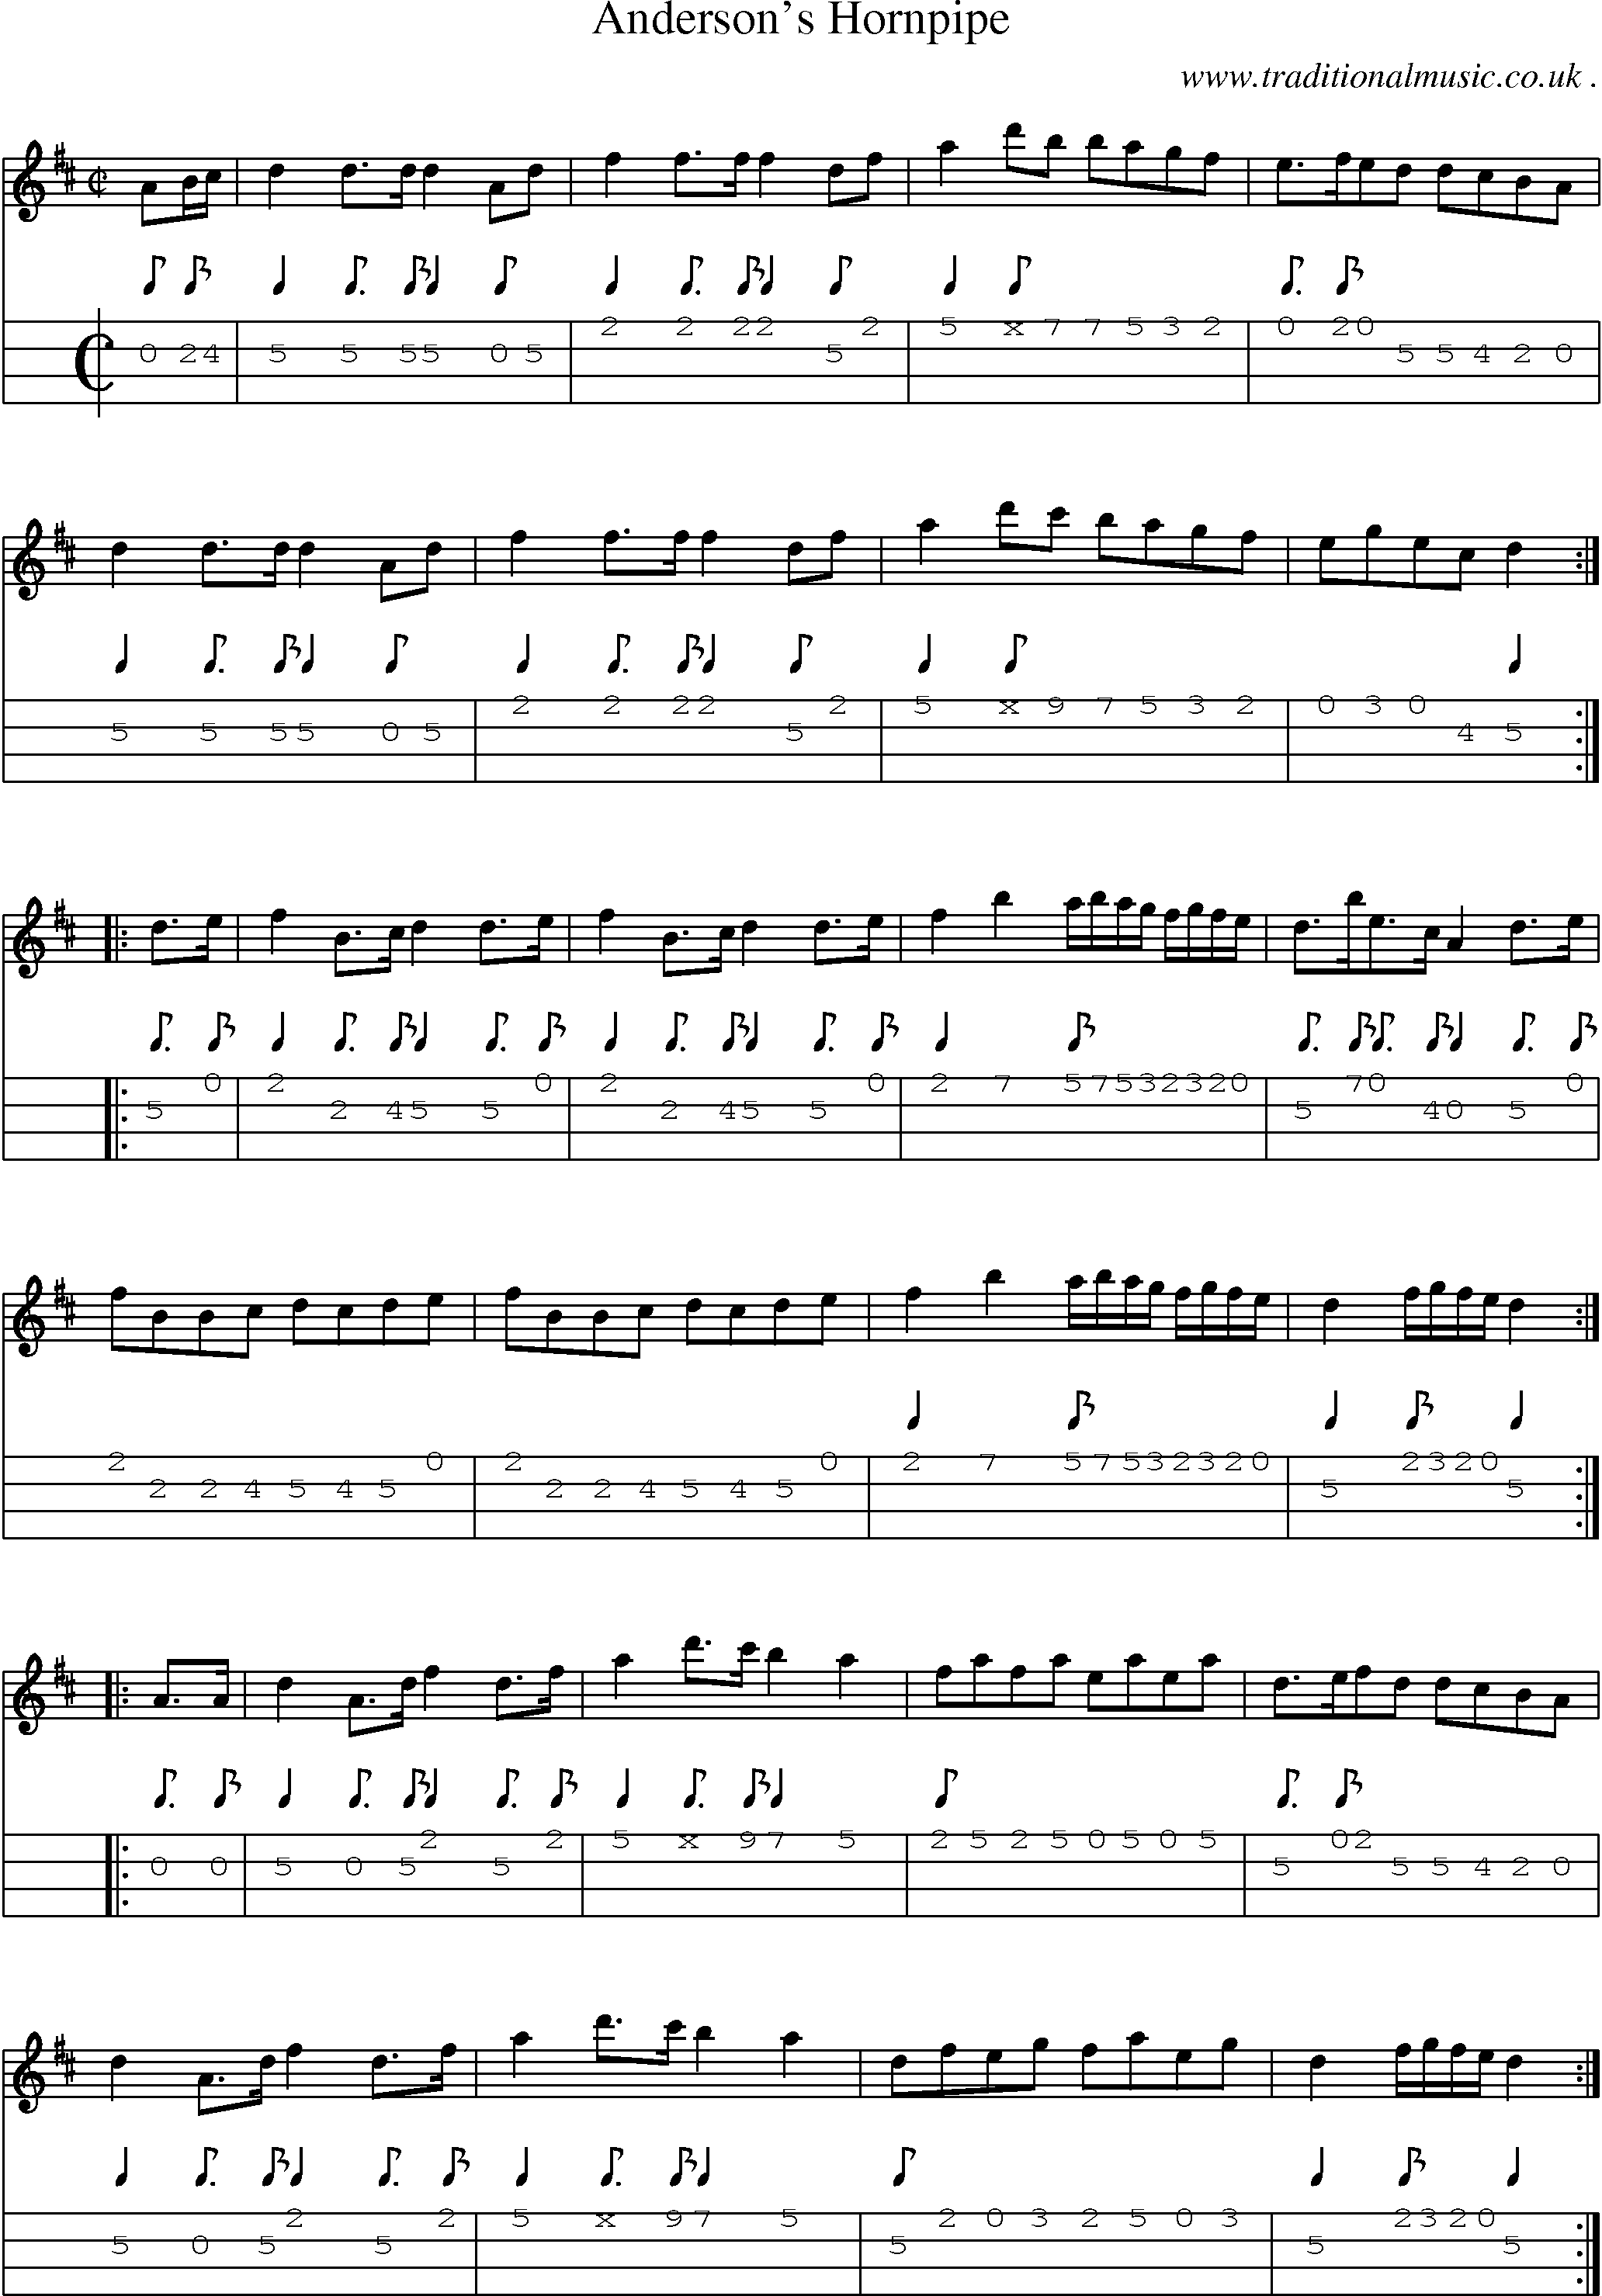 Sheet-Music and Mandolin Tabs for Andersons Hornpipe